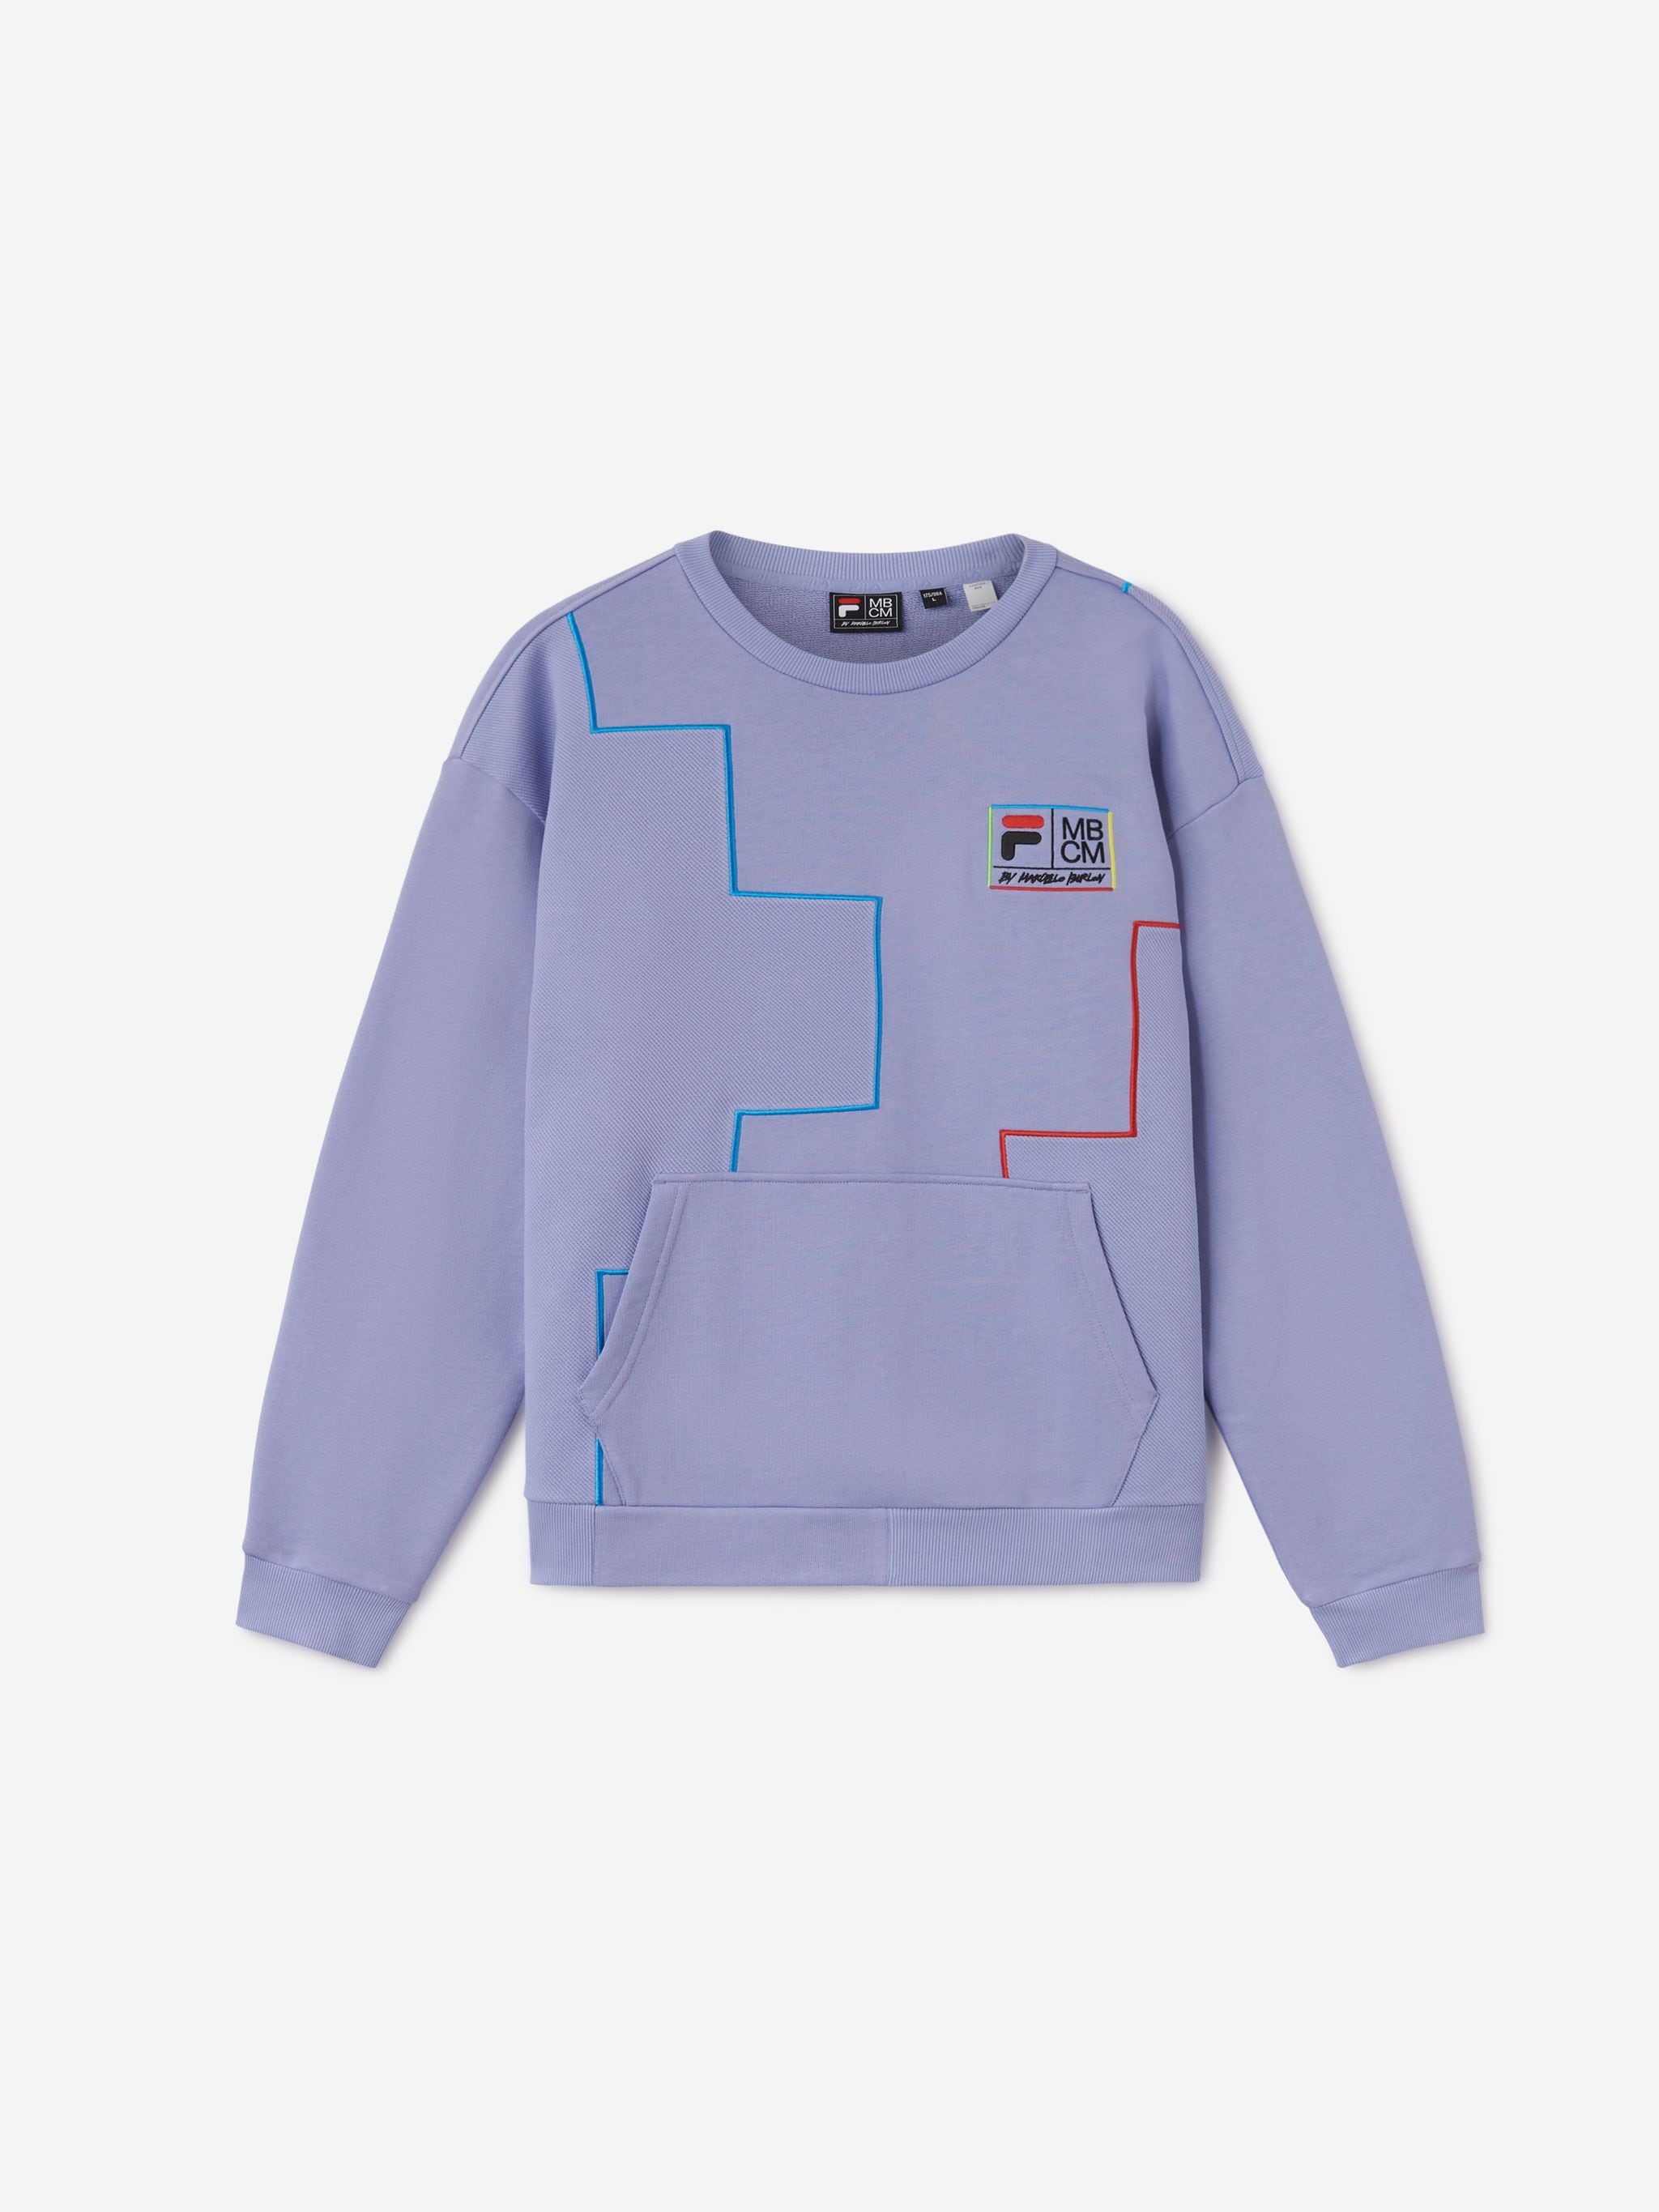 Lilac cotton x FILA logo patch sweatshirt from Marcelo Burlon County of Milan featuring logo patch to the front, front pouch pocket, crew neck, long sleeves and straight hem.